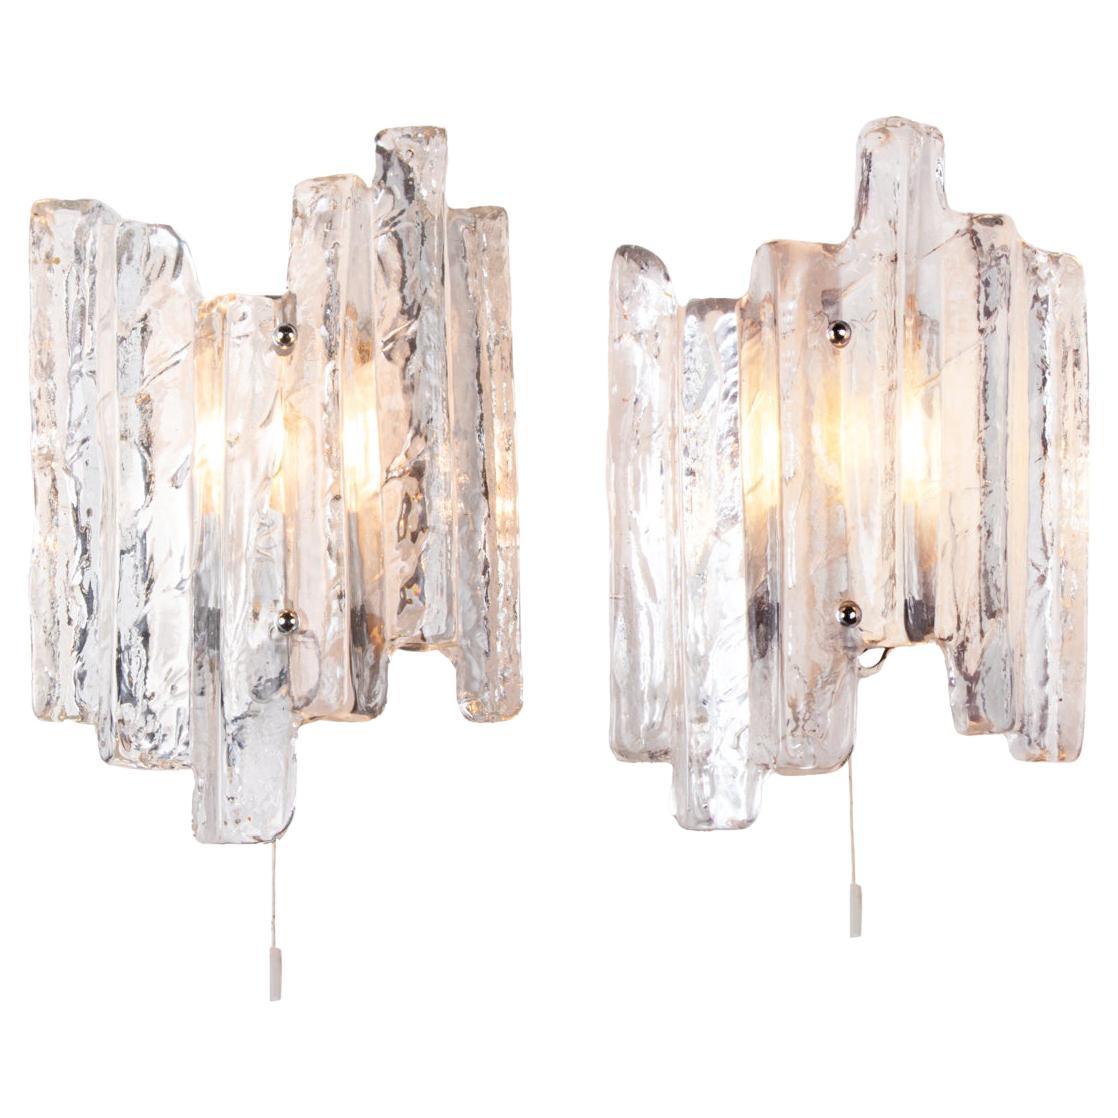 1 (of 2) Pair of  Kalmar Wall Sconces Frosted Glass and Chrome, Austria 1960s For Sale